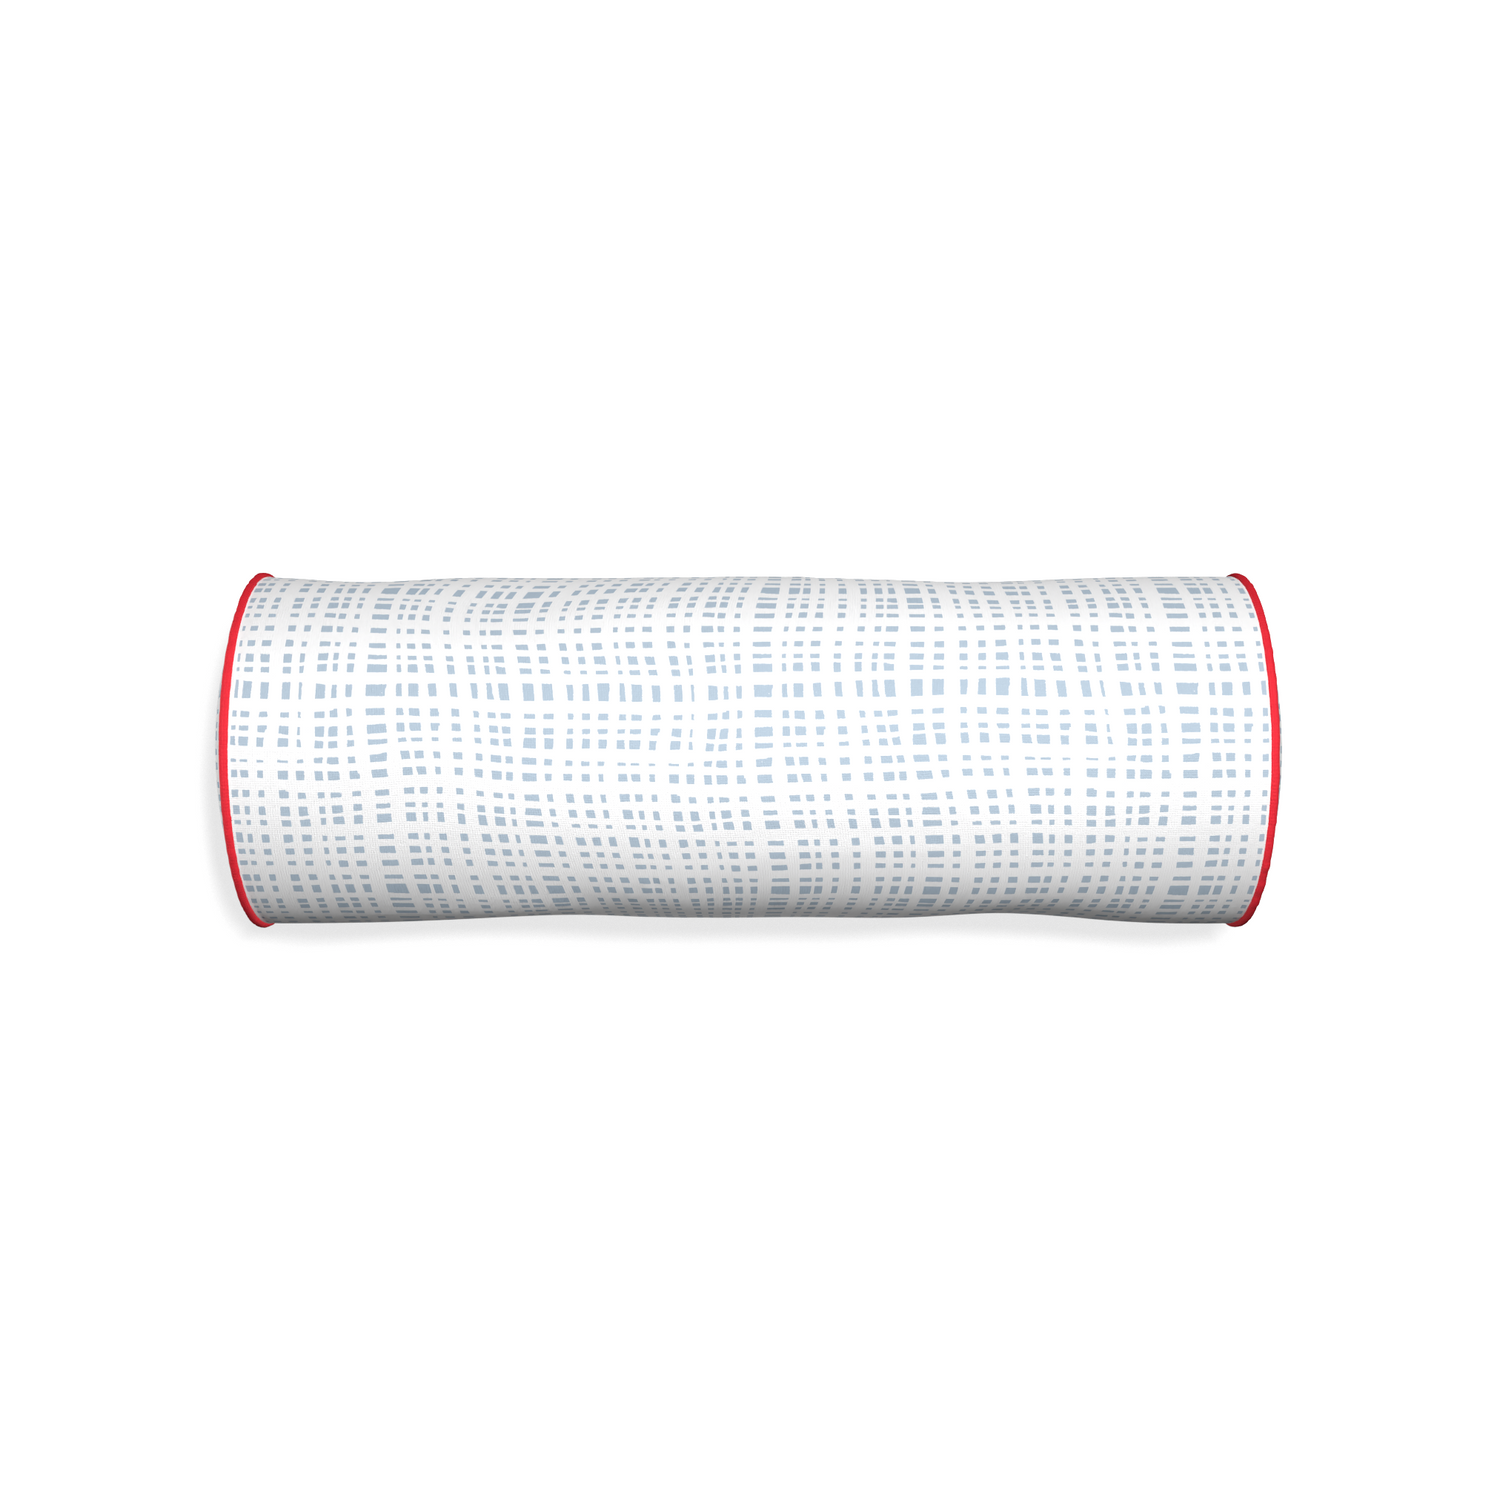 Bolster ginger custom plaid sky bluepillow with cherry piping on white background